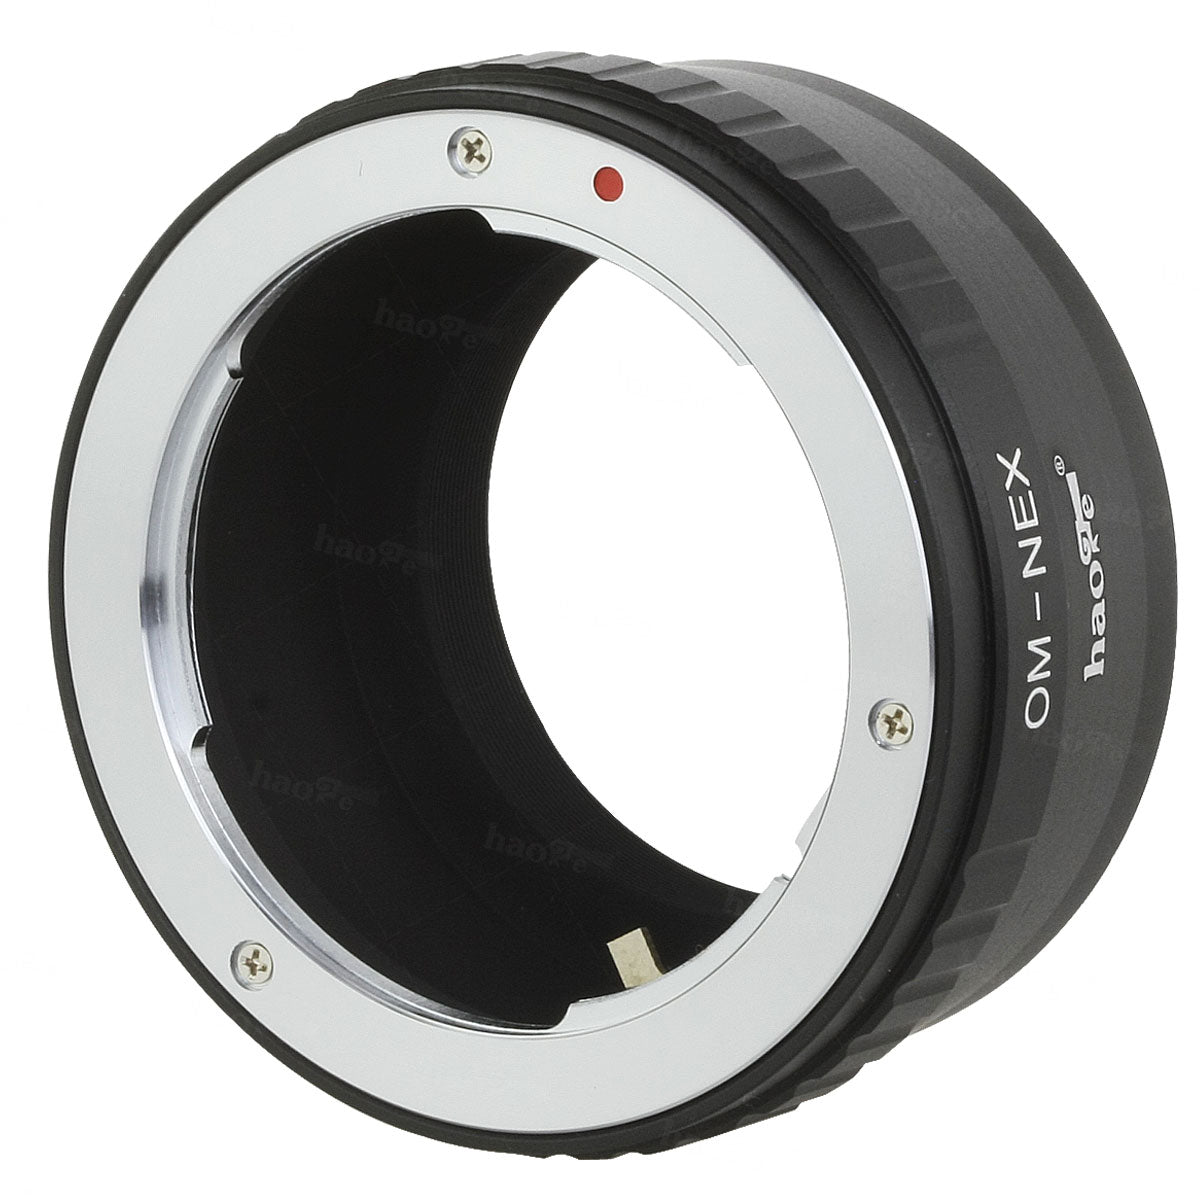 Haoge Lens Mount Adapter for Olympus Zuiko OM Mount Lens to Sony E-mount NEX Camera such as NEX-3, NEX-5, NEX-5N, NEX-7, NEX-7N, NEX-C3, NEX-F3, a6300, a6000, a5000, a3500, a3000, NEX-VG10, VG20